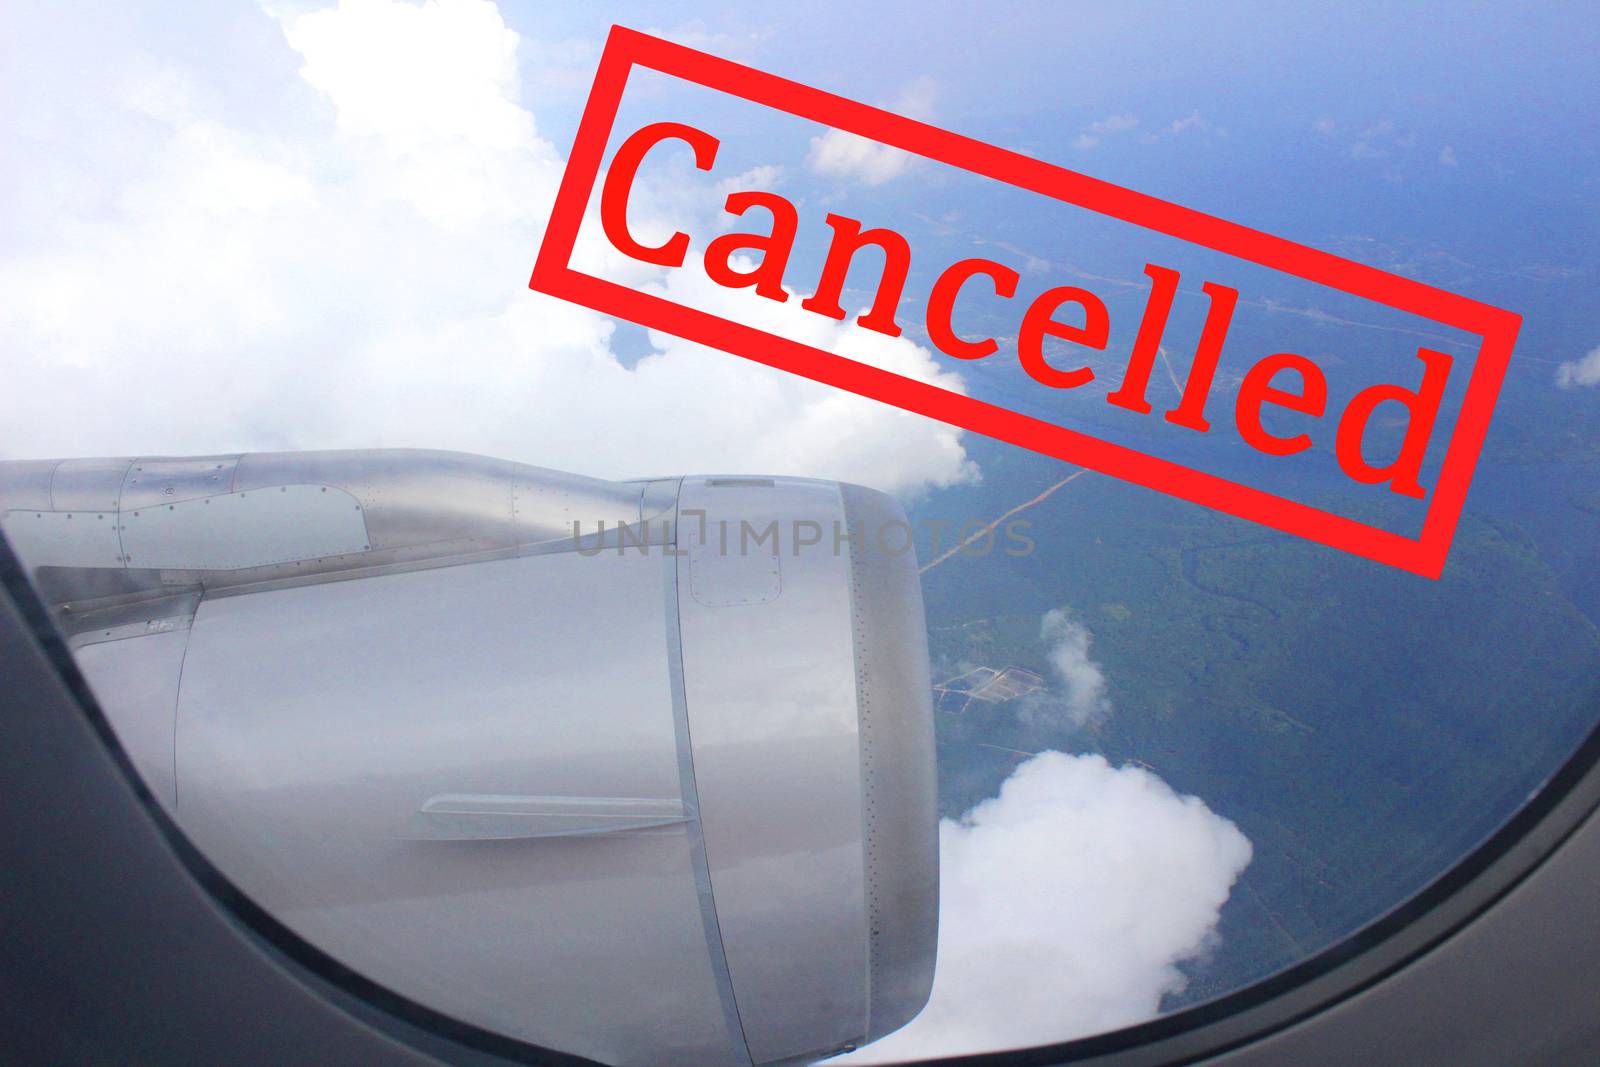 Covid 19 cancellation of all flying lines and trips due to the Covid 19 virus outbreak.Coronavirus flight cancelled concept